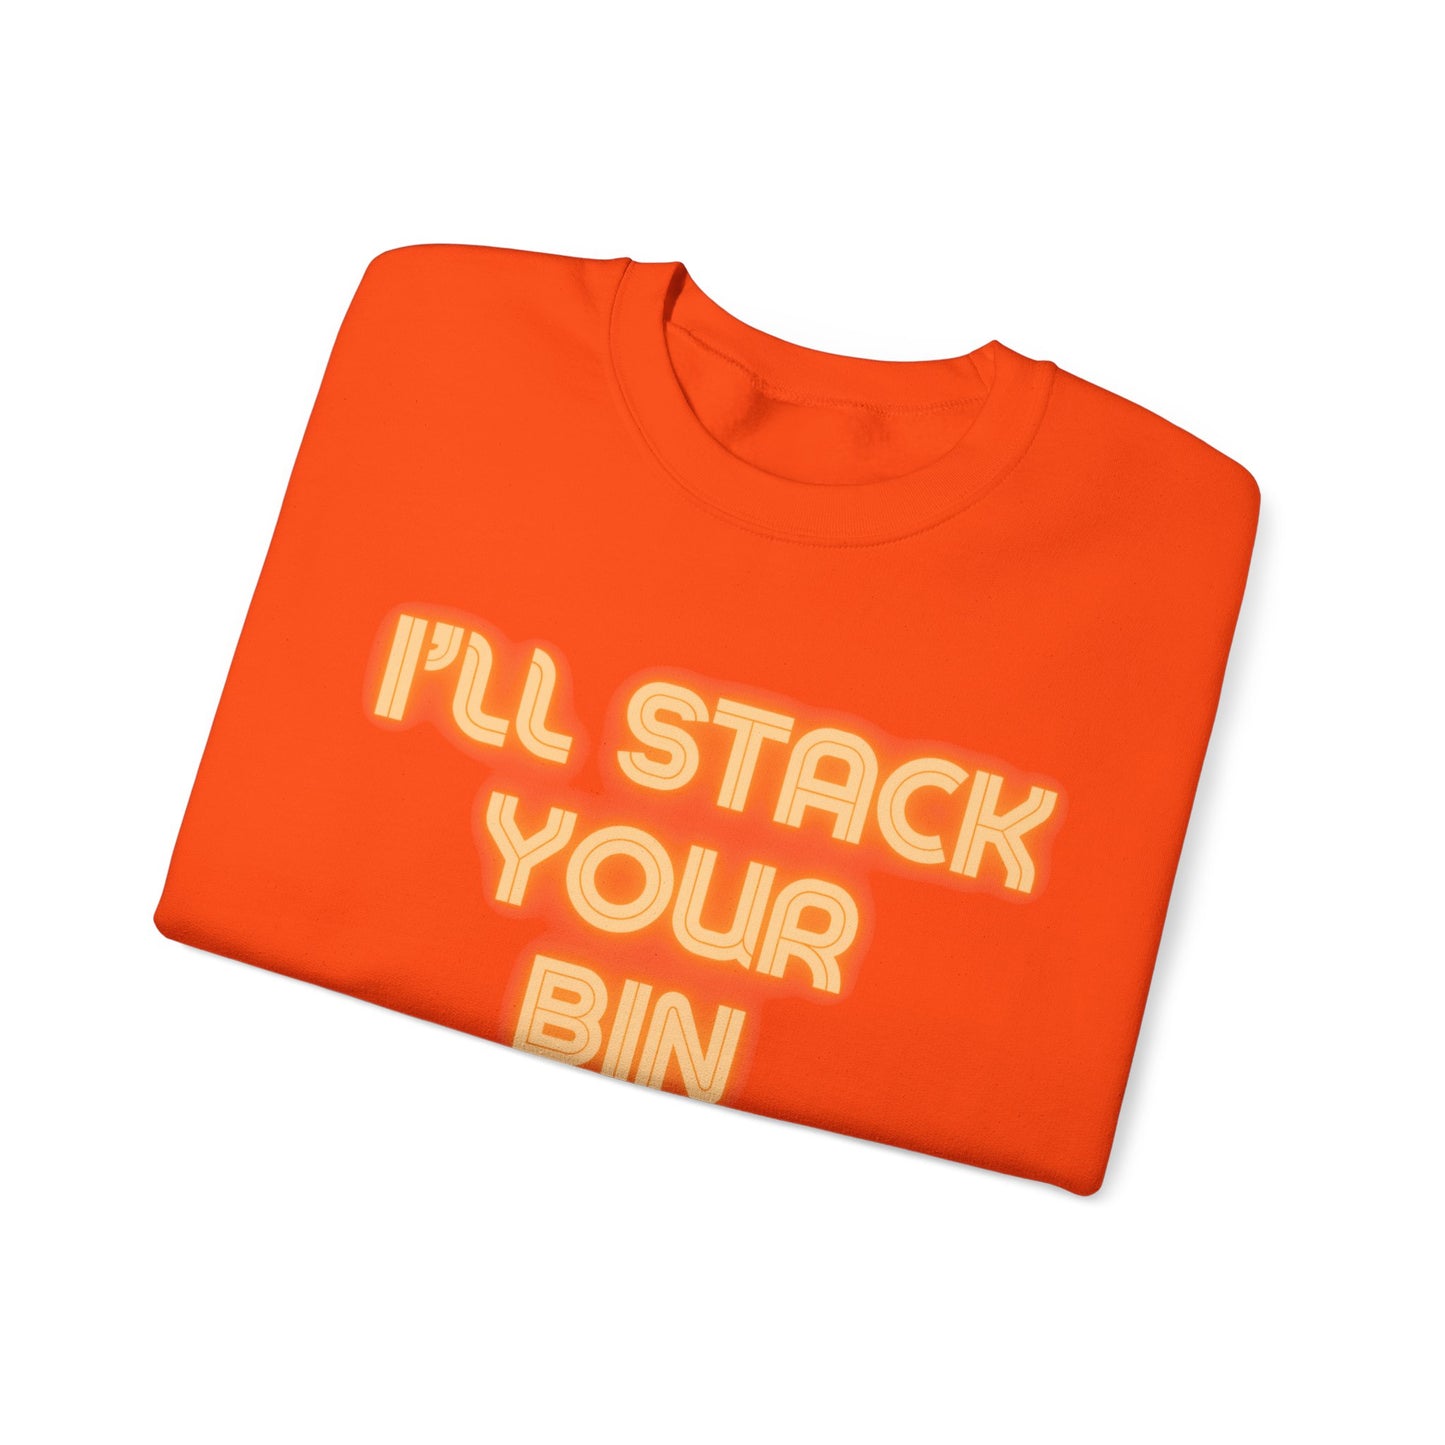 I'LL STACK YOUR BIN